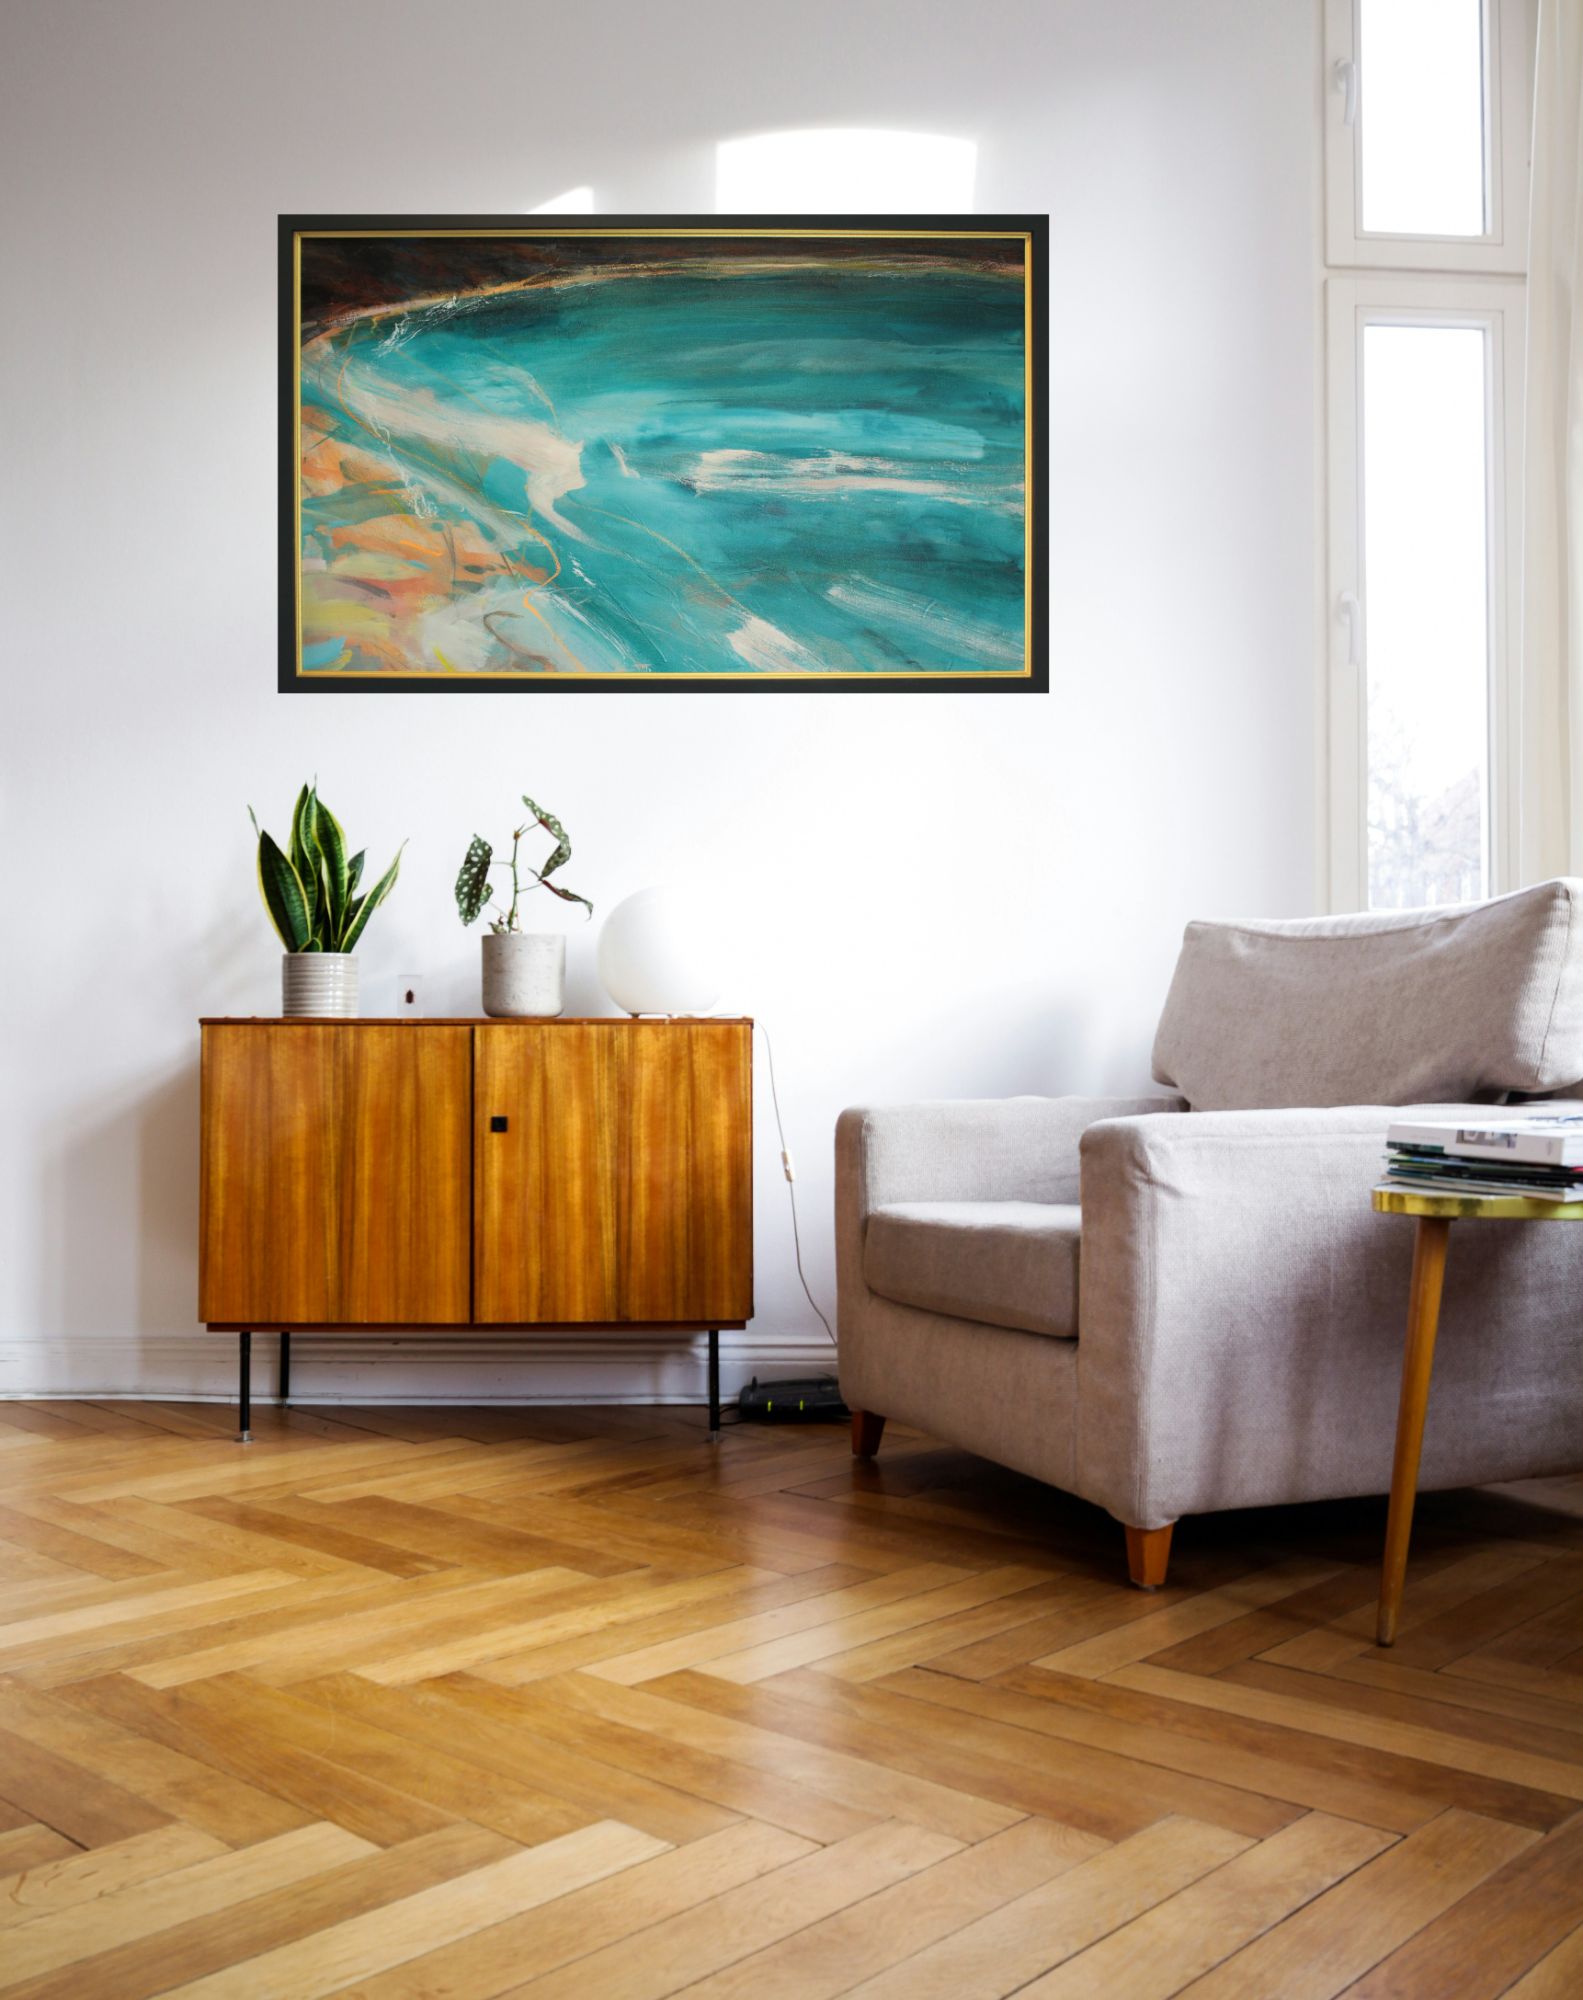 Abstract seascape painting in room